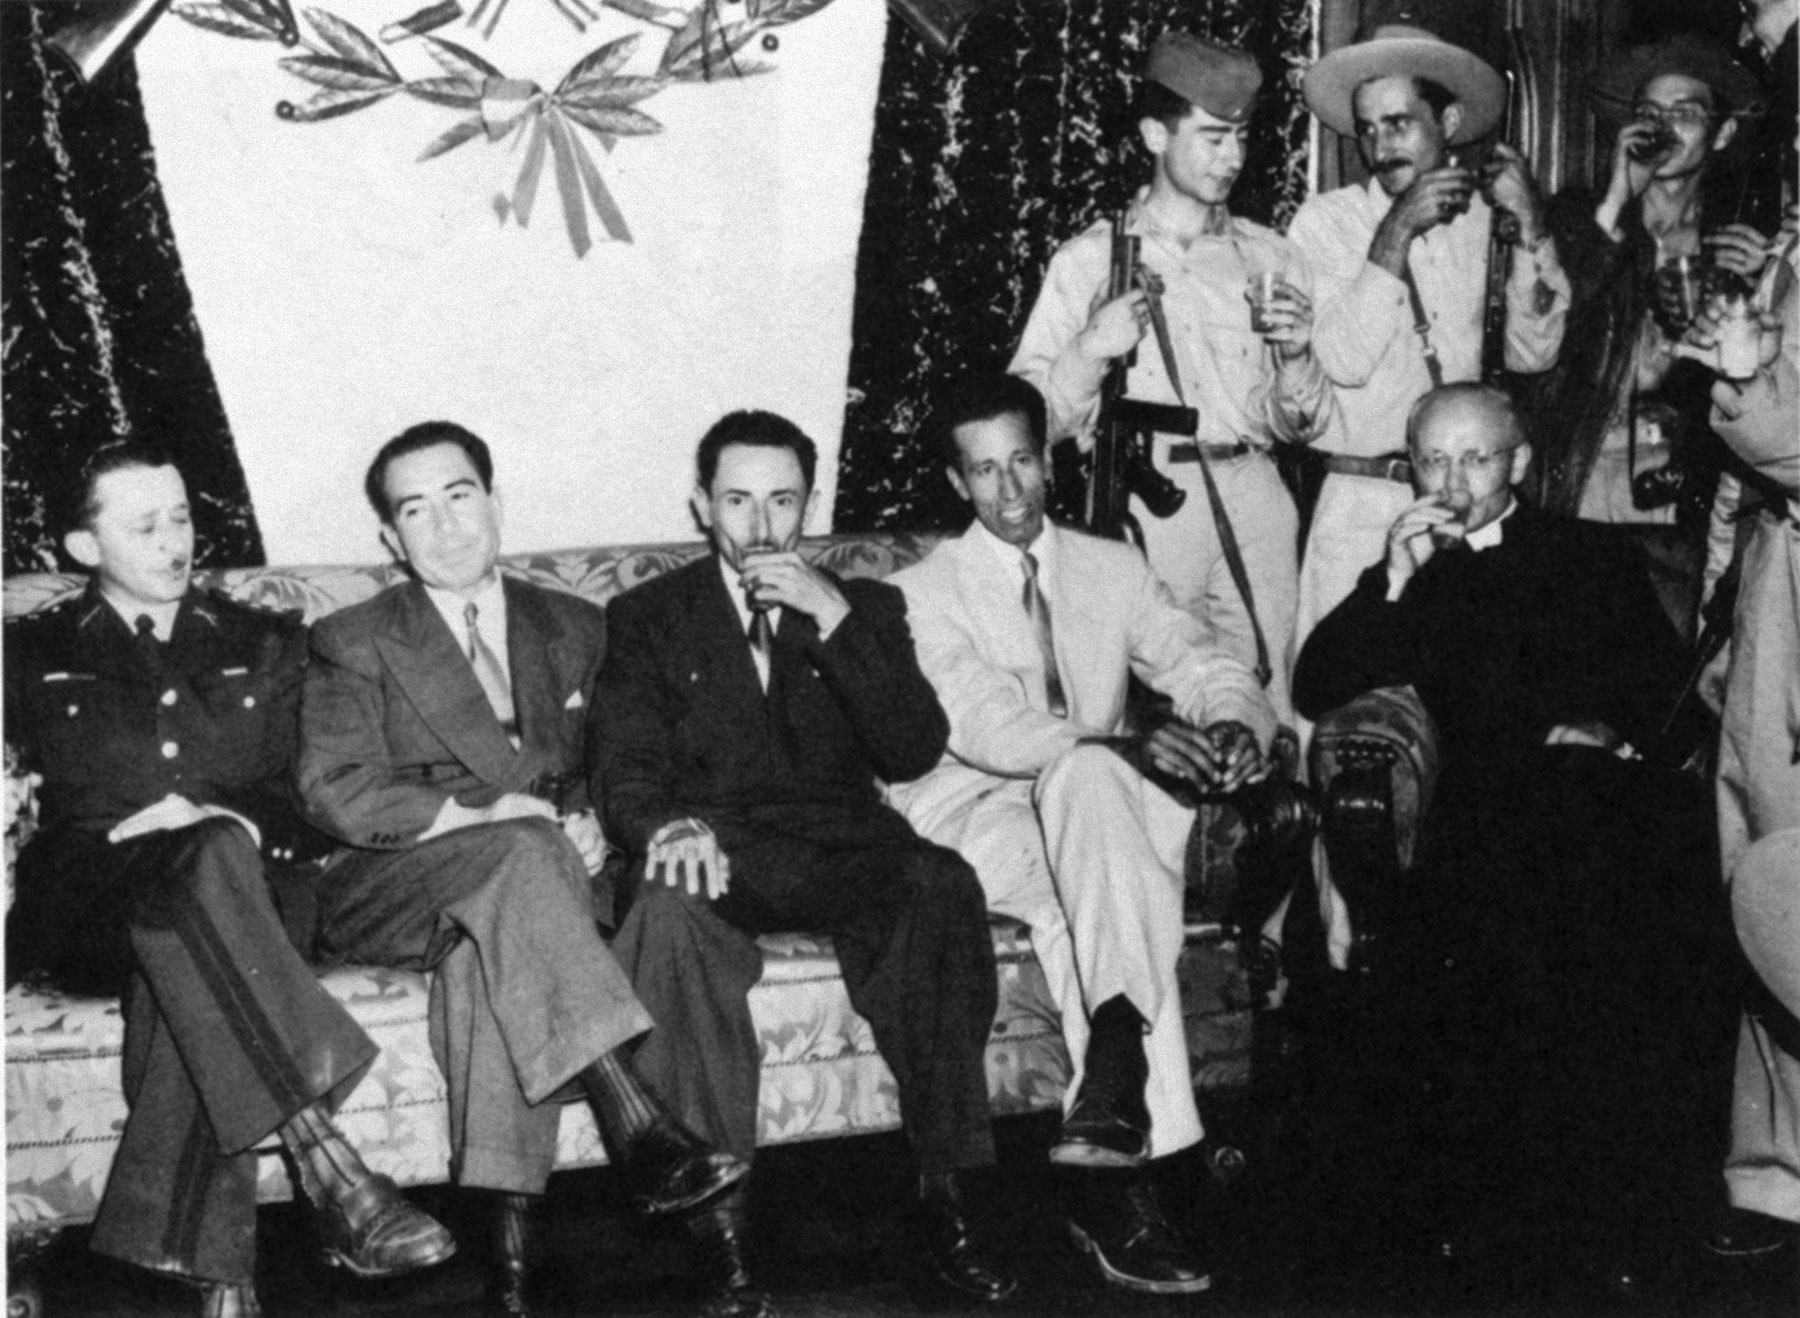 A photograph of four of the five members of the original Castillo Armas junta (seated on couch) posing with Papal Nuncio Monsignor Gennaro Verrolino, a bitter Árbenz opponent (seated on chair, far right). Castillo Armas is third from left on the couch.